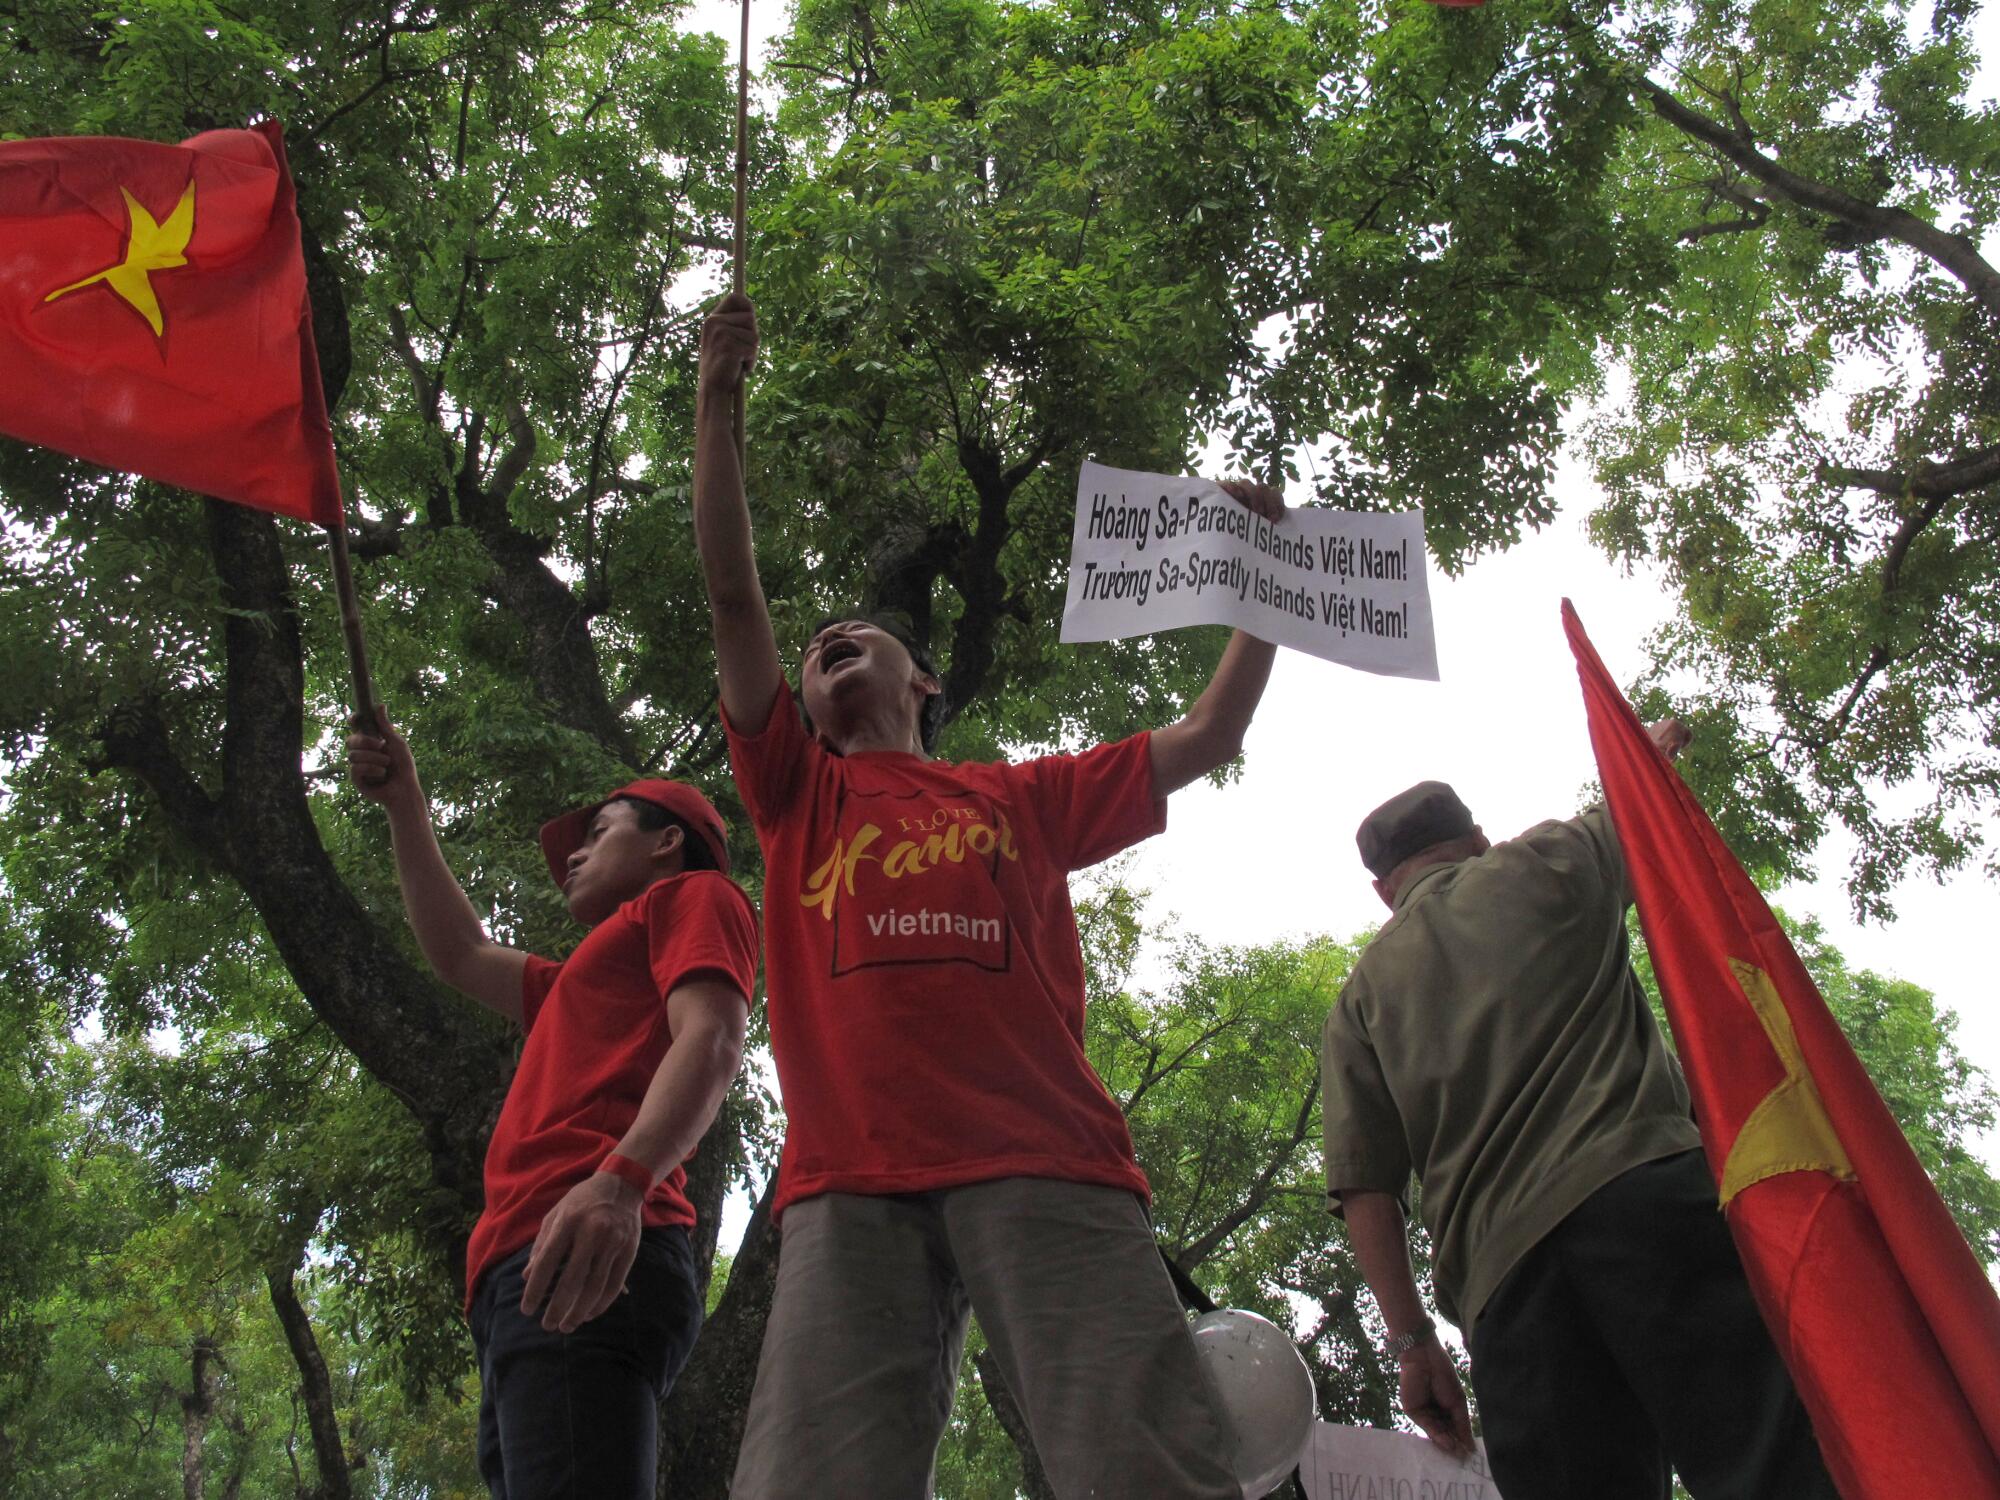 Protesters wave red Vietnamese flags and hold signs